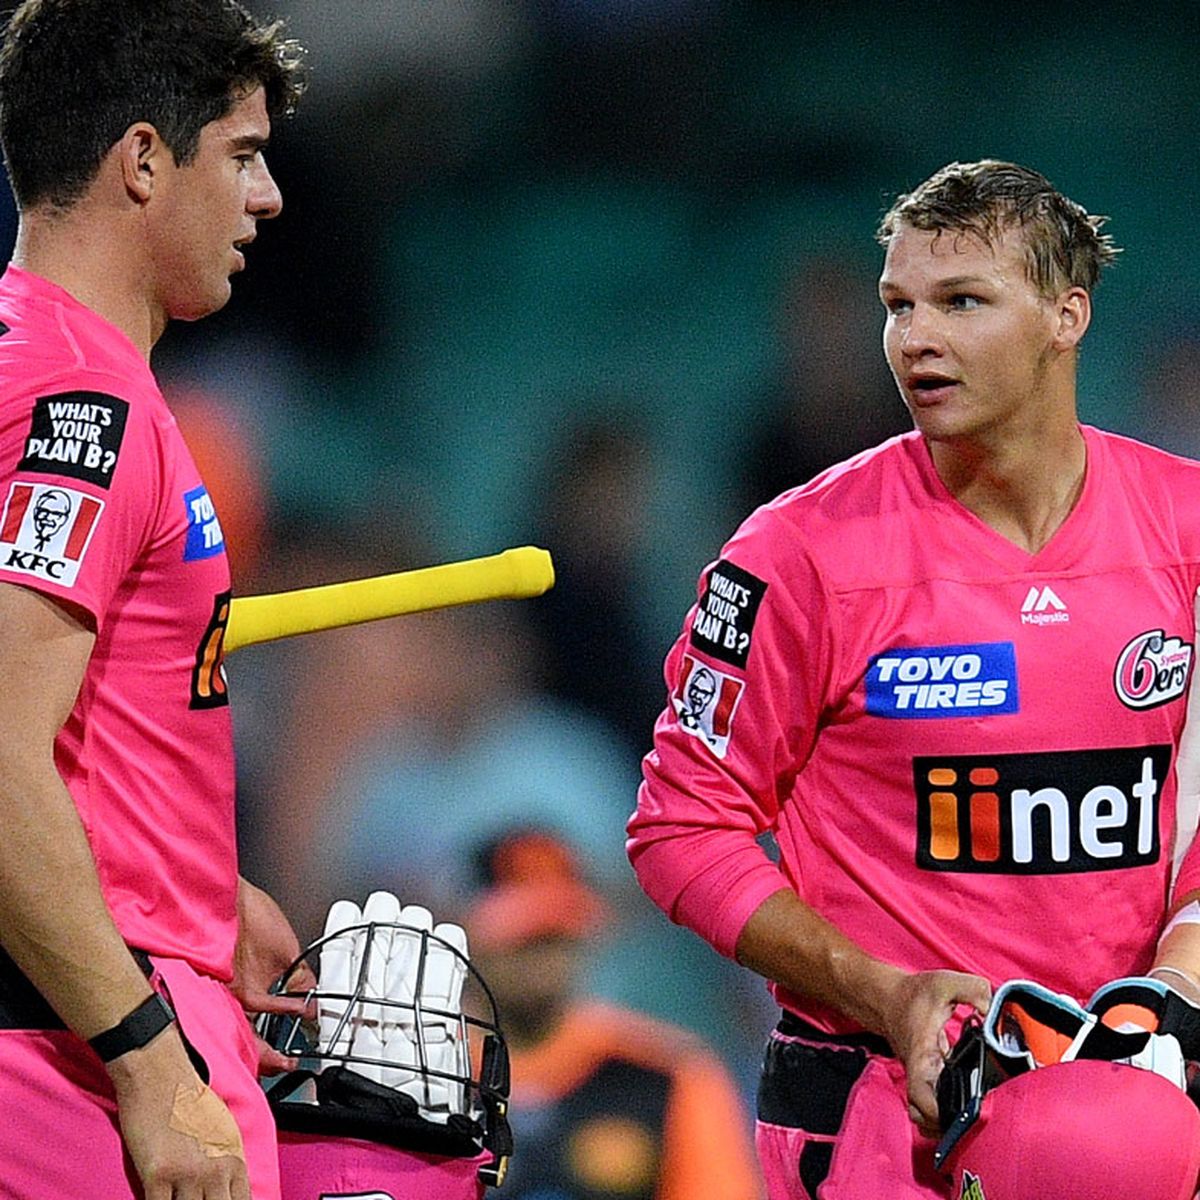 Bbl Sydney Sixers Got A Little Bit Excited In Bbl Collapse To Hobart Hurricanes Says Captain Moises Henriques